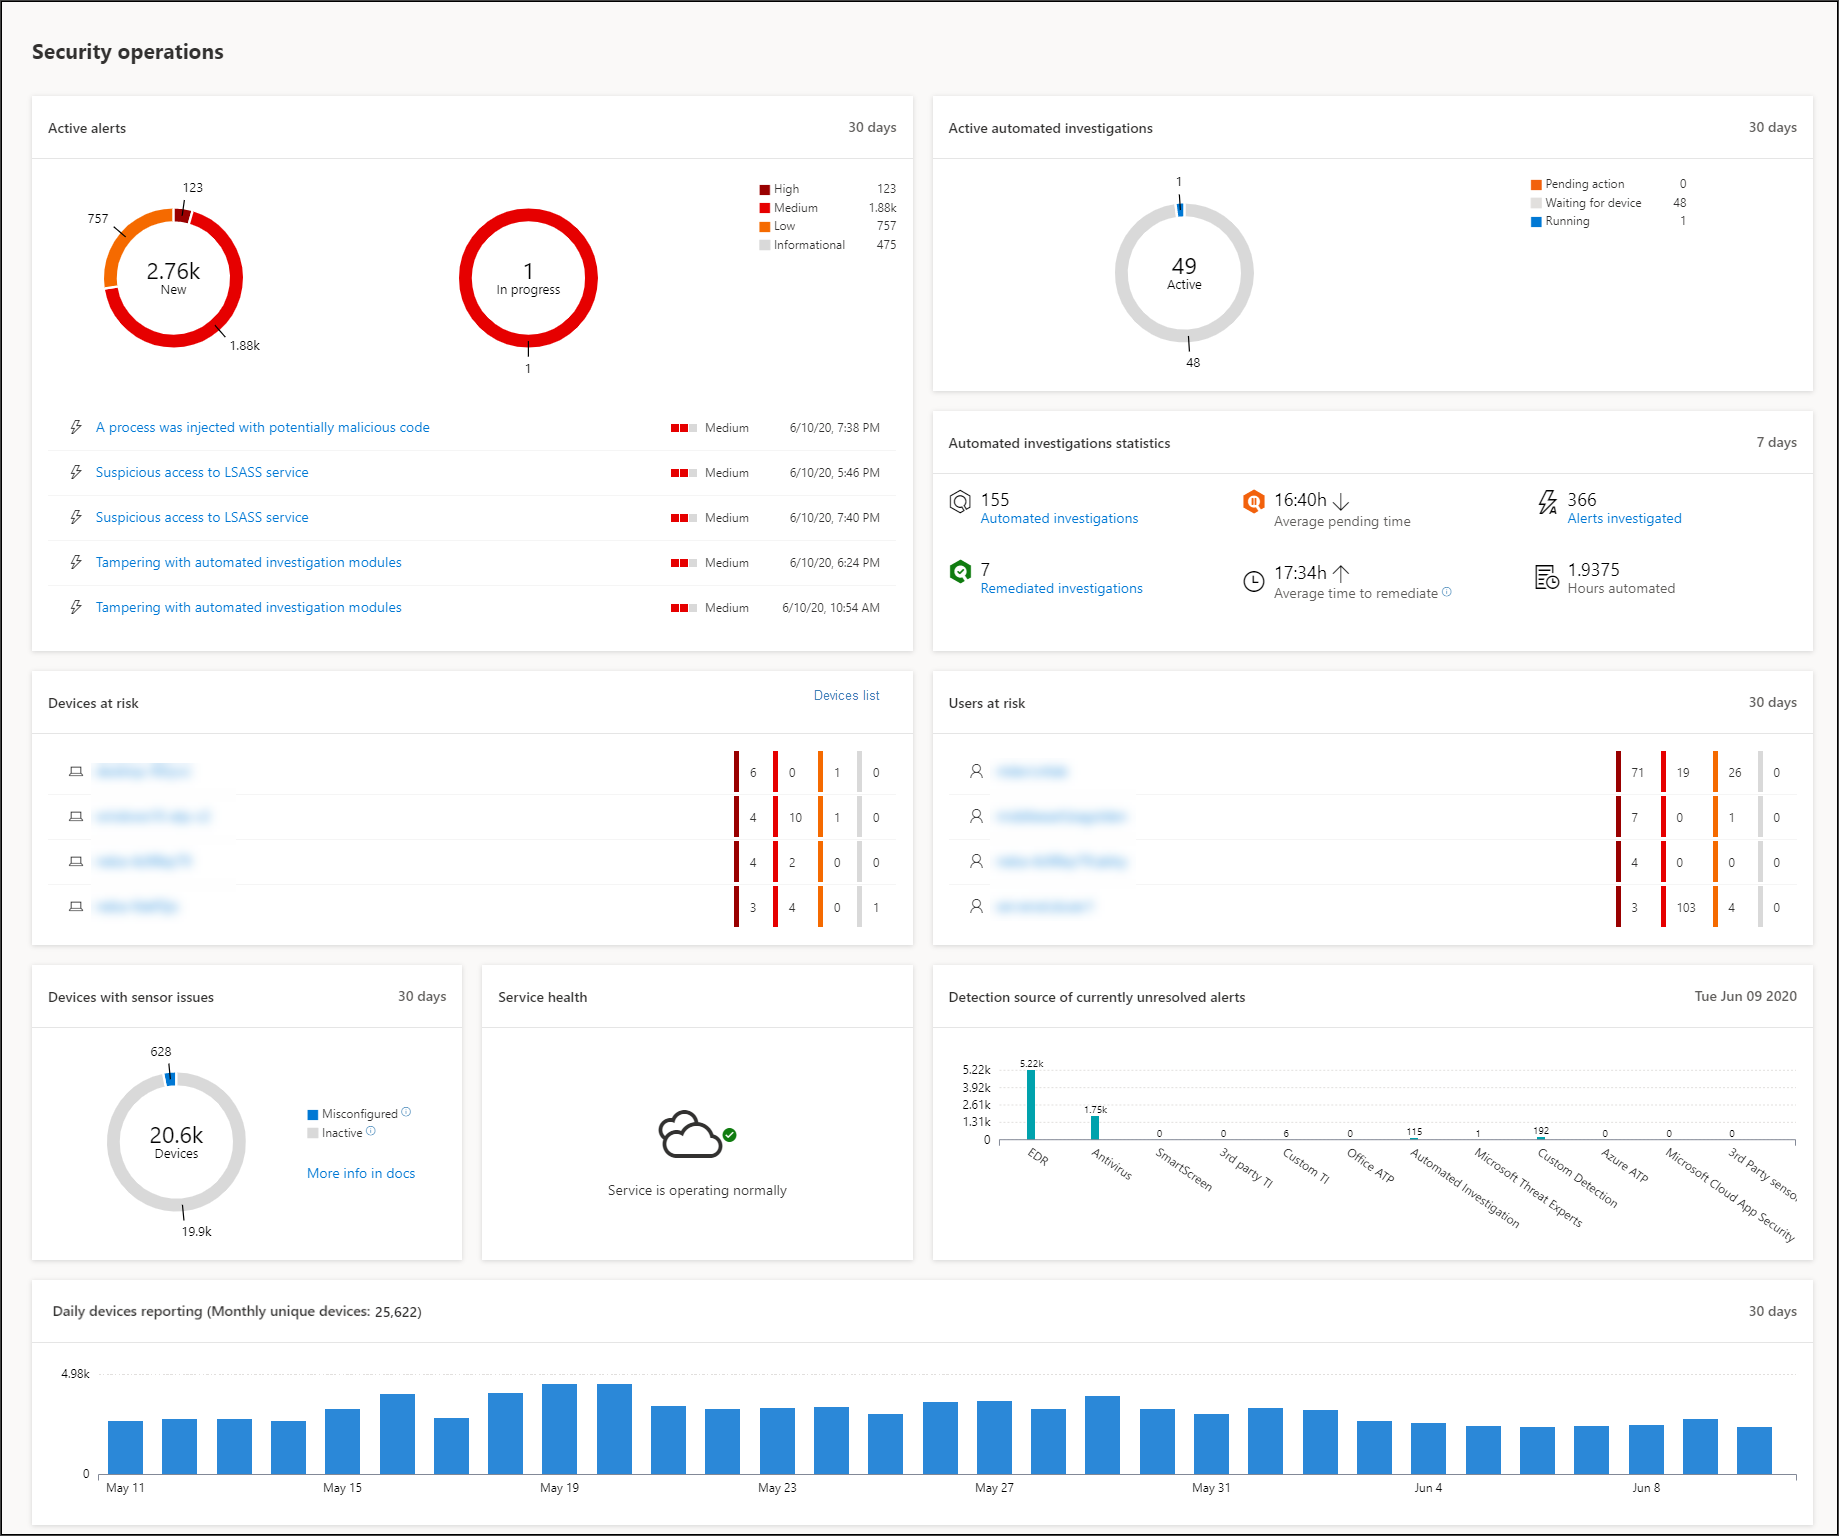 Image of Security operations dashboard.